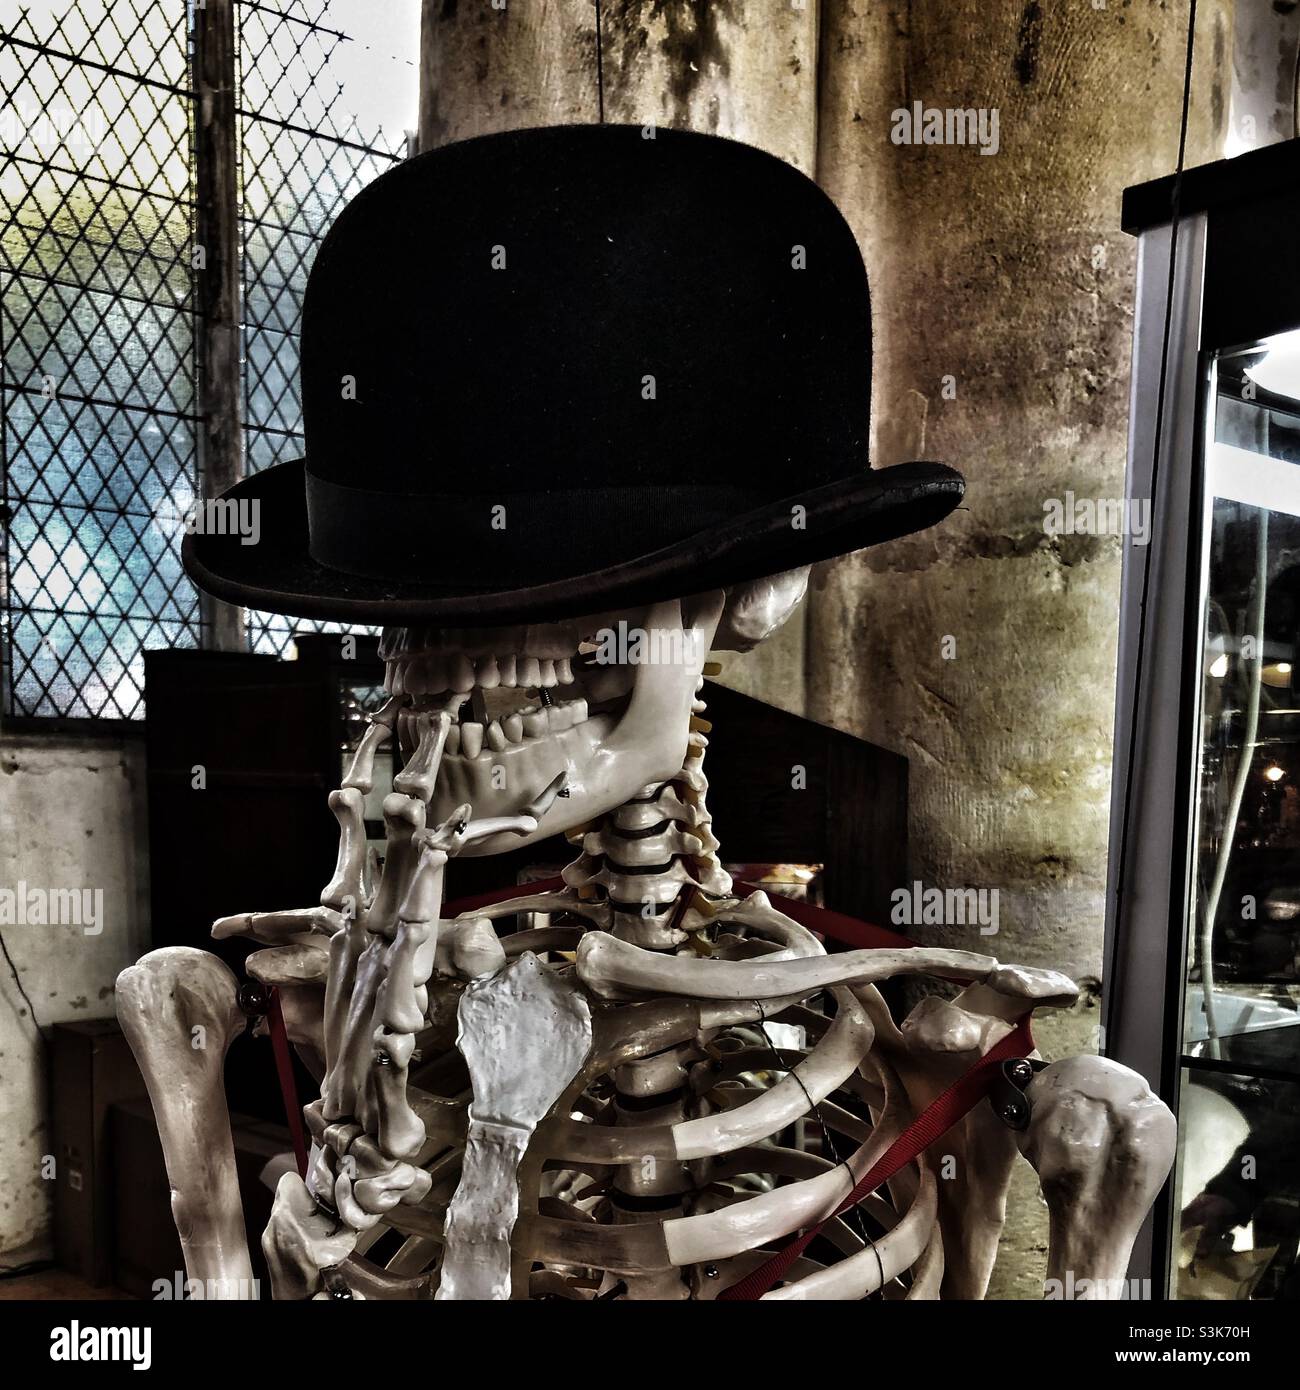 Halloween decorations: Skeleton in a Black Hat Stock Photo